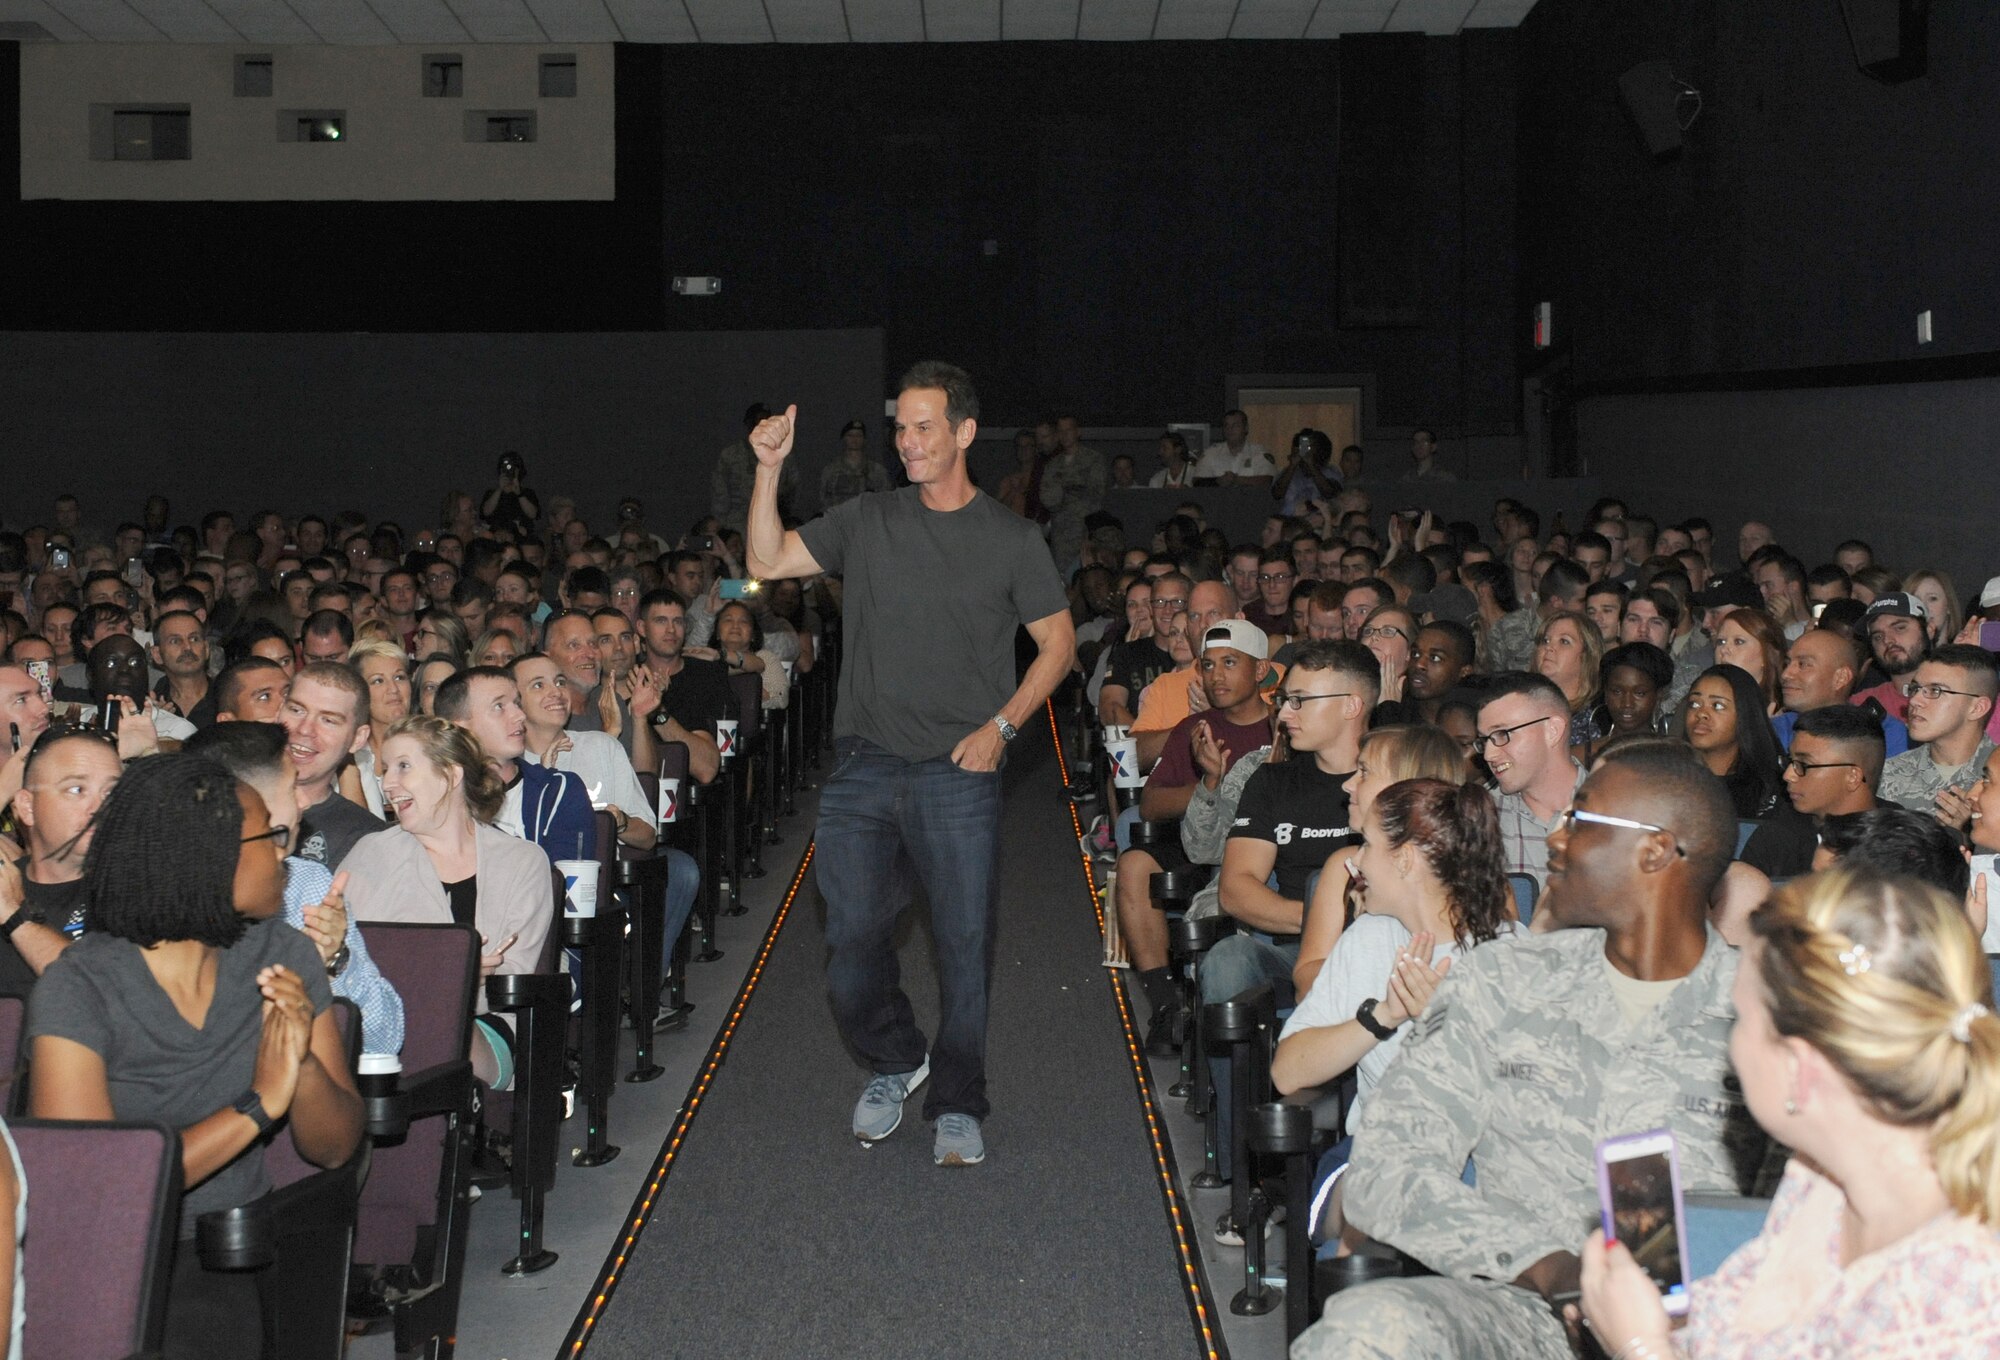 Peter Berg, Deepwater Horizon director, walks into the Welch Theater before the Deepwater Horizon movie screening Sept. 20, 2016, on Keesler Air Force Base, Miss. Before the screening, Kurt Russell, Kate Hudson, Deepwater Horizon actors, and Berg took a short tour of the 81st Training Wing and 403rd Wing to meet with Airmen and learn about their missions at Keesler. (U.S. Air Force photo by Kemberly Groue/Released)